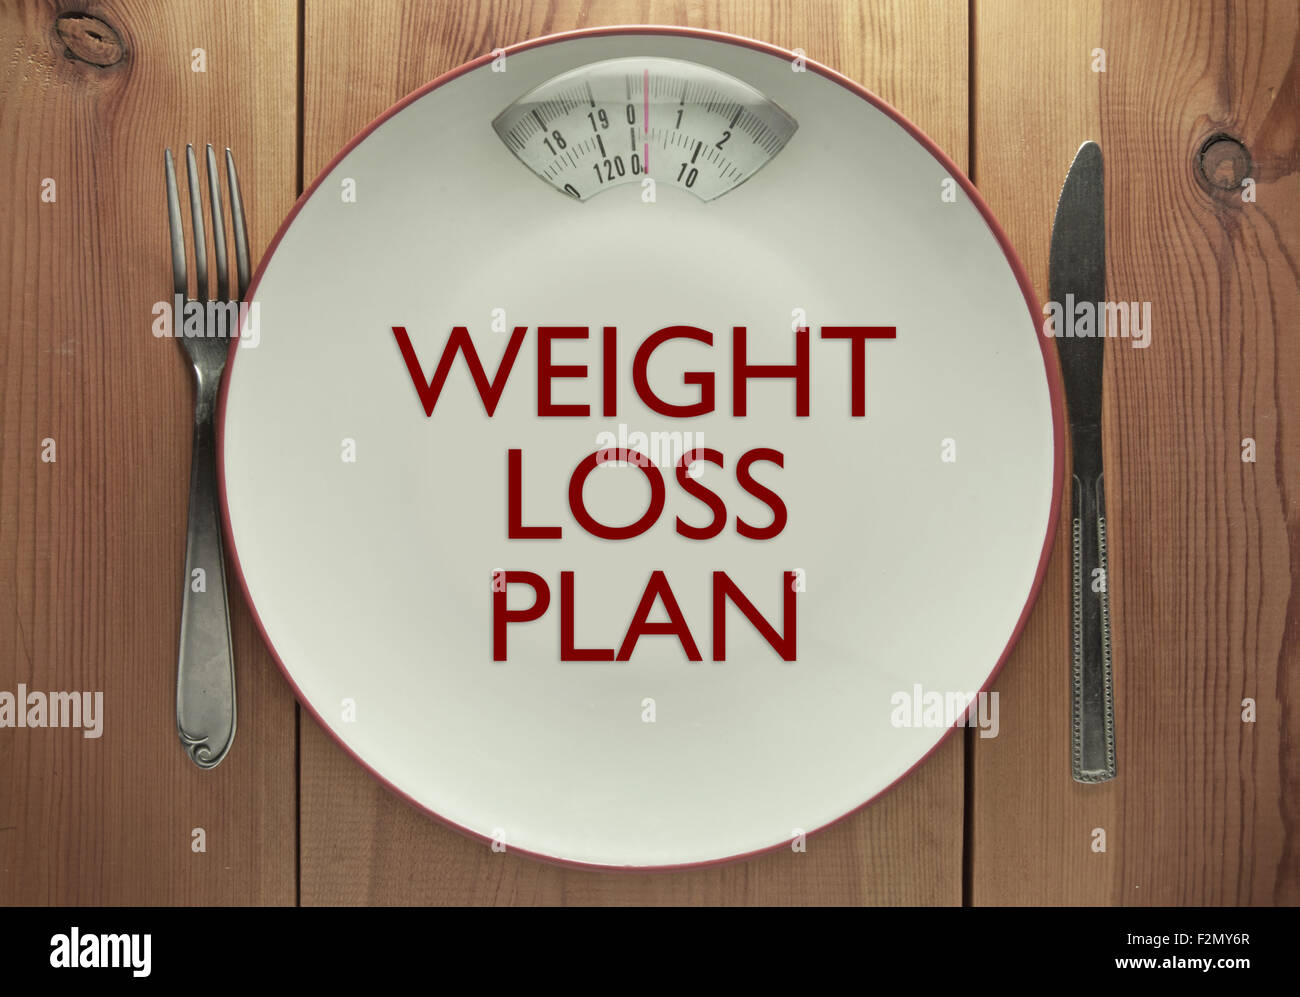 Weight loss plan printed on a plate with bathroom scales Stock Photo